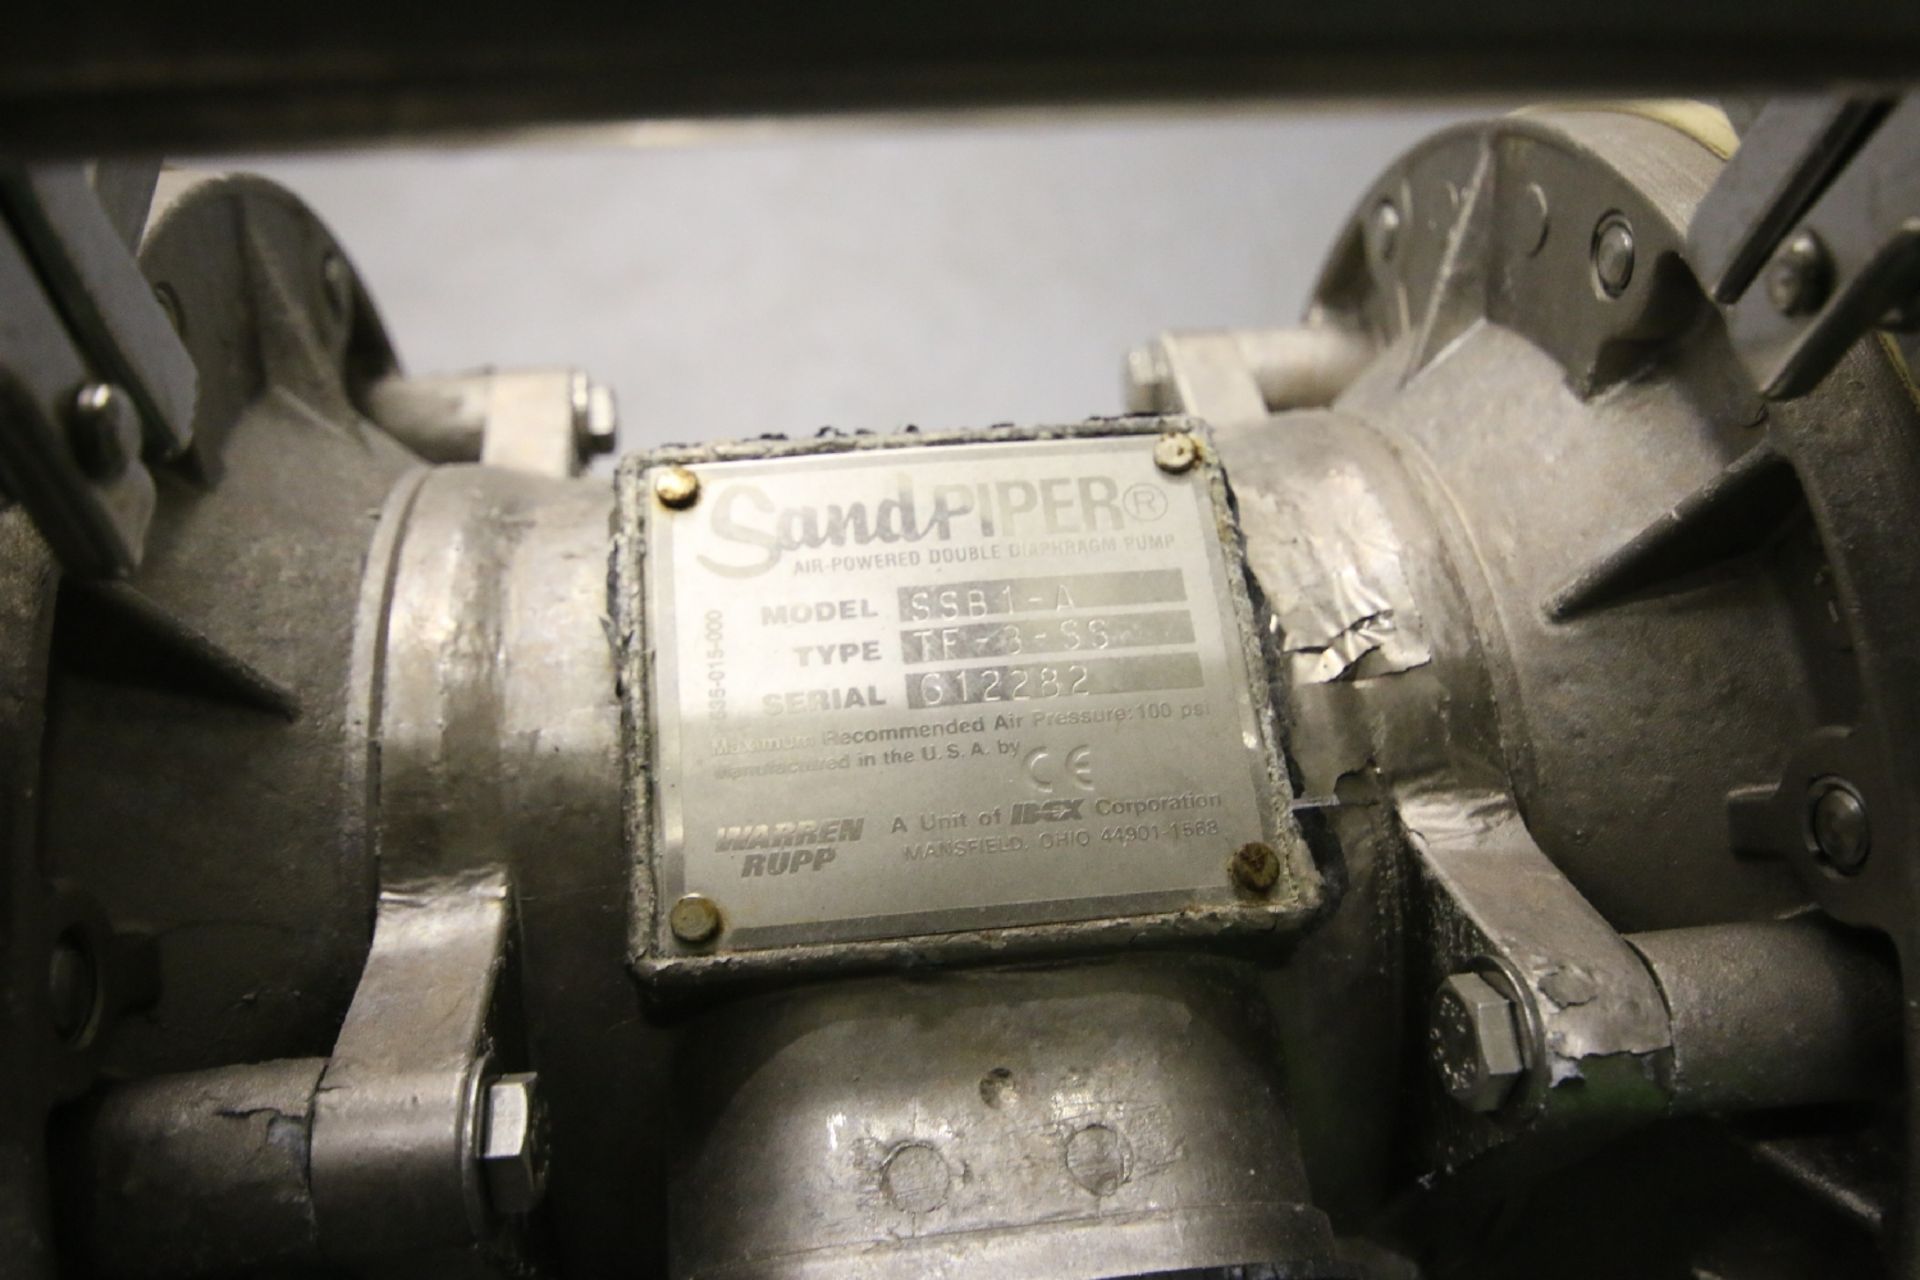 Warren Rupp Sandpiper Series S/S Diaphragm Pump, Model SSB1-A, Type TF-3-SS, S/N 612282 with - Image 3 of 3